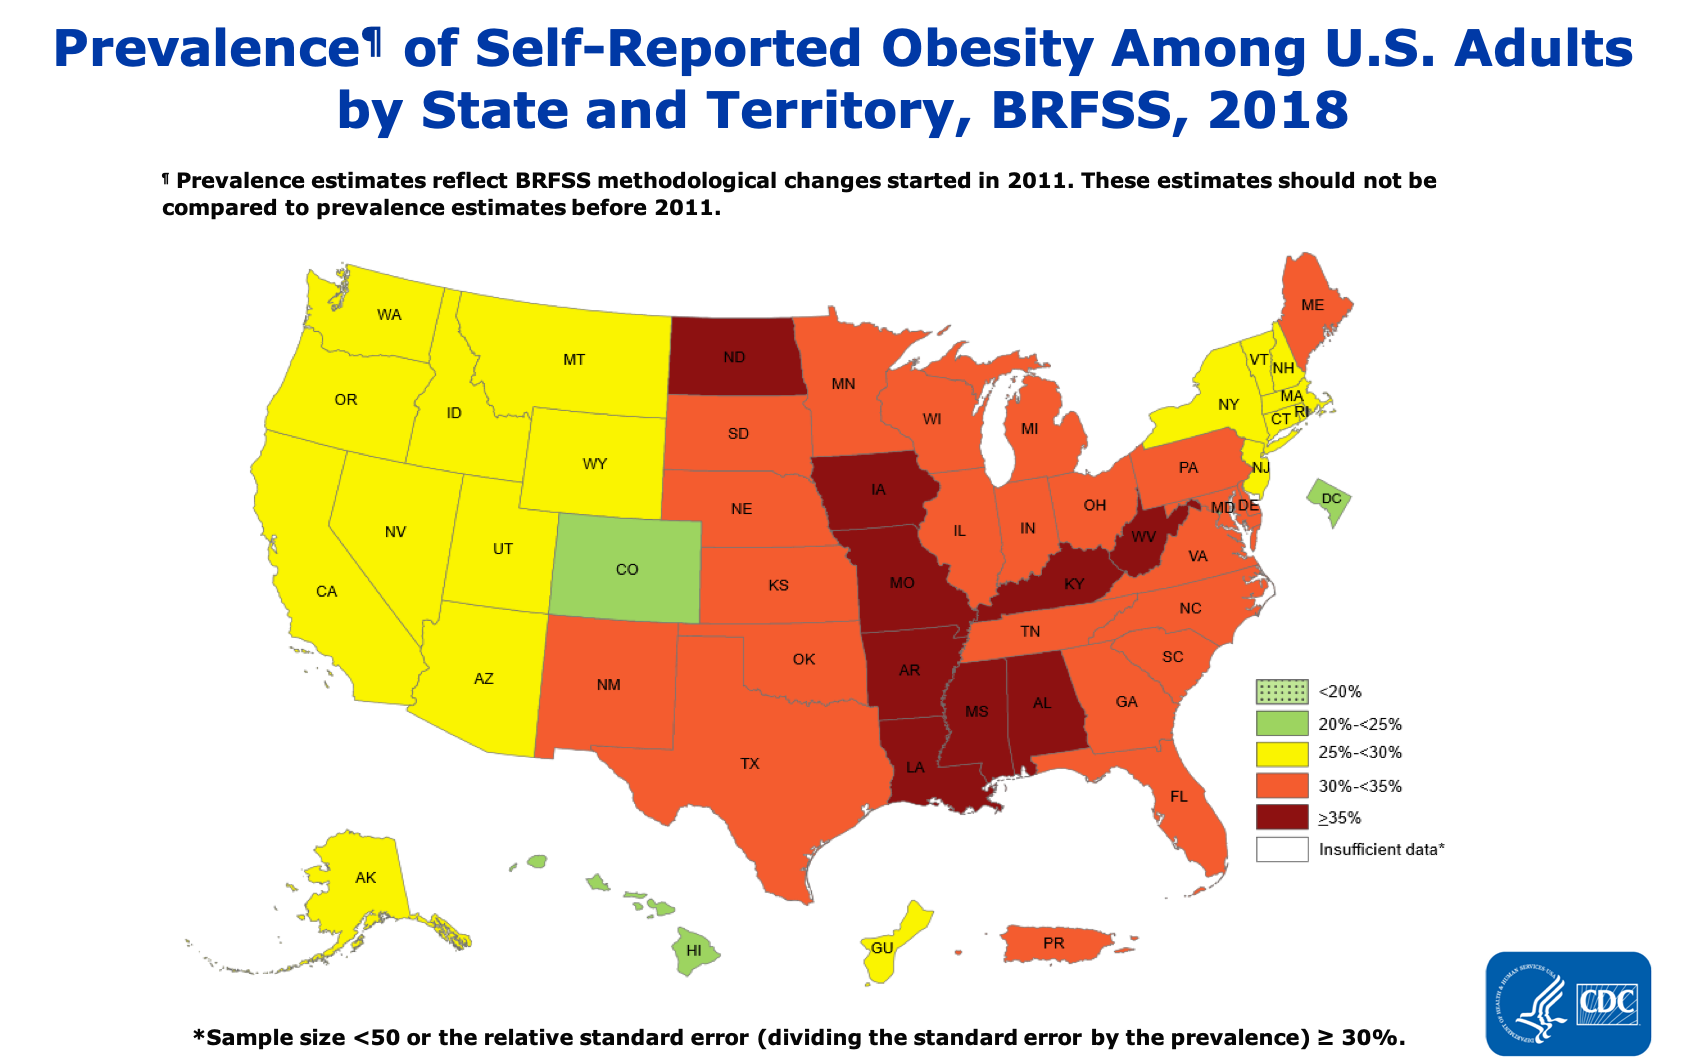 A map of the U.S. showing obesity prevalence color-coded by state. Only a handful of states are green (20-25% obesity). Most of the Western U.S., New England, New York, and New Jersey are yellow (25-30% obesity). The rest of the country is dominated by red (30-35% obesity) or dark red (greater than 35% obesity).